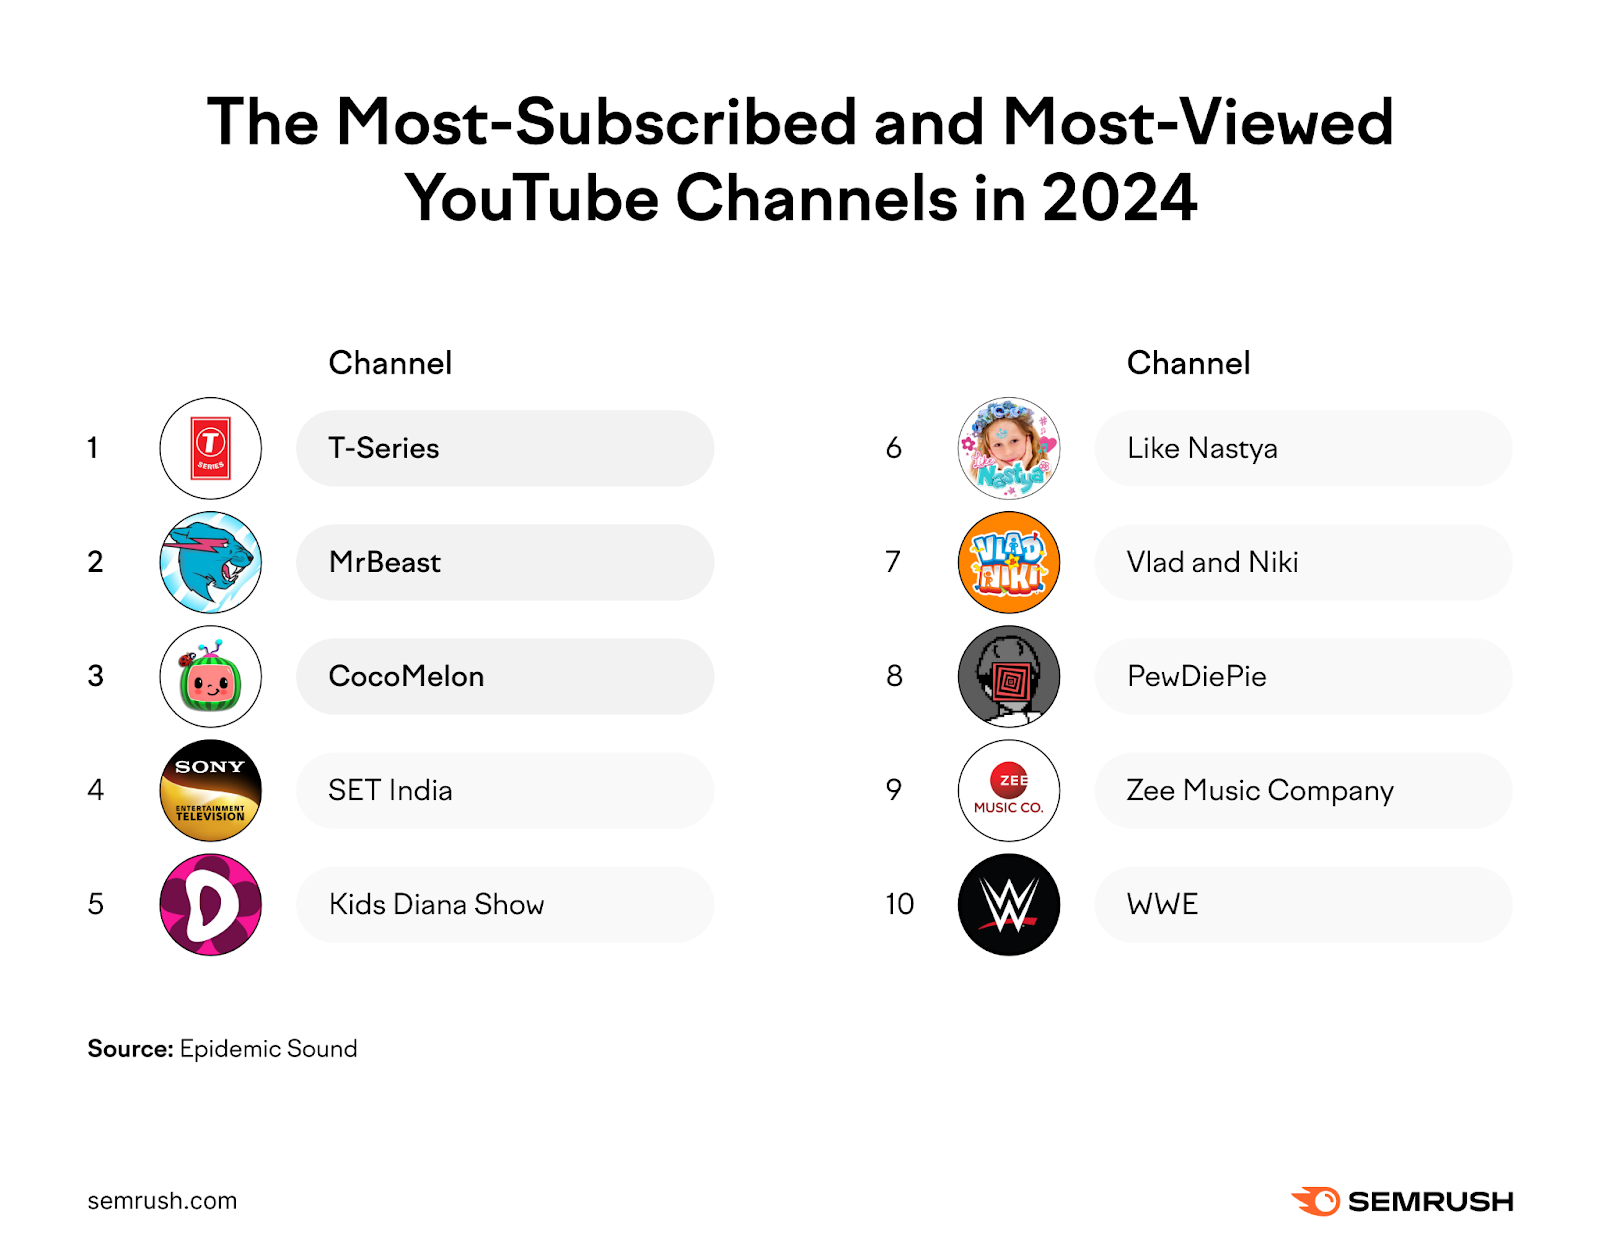 A list of the most-subscribed and most-viewed YouTube channels in 2024 by Epidemic Sound